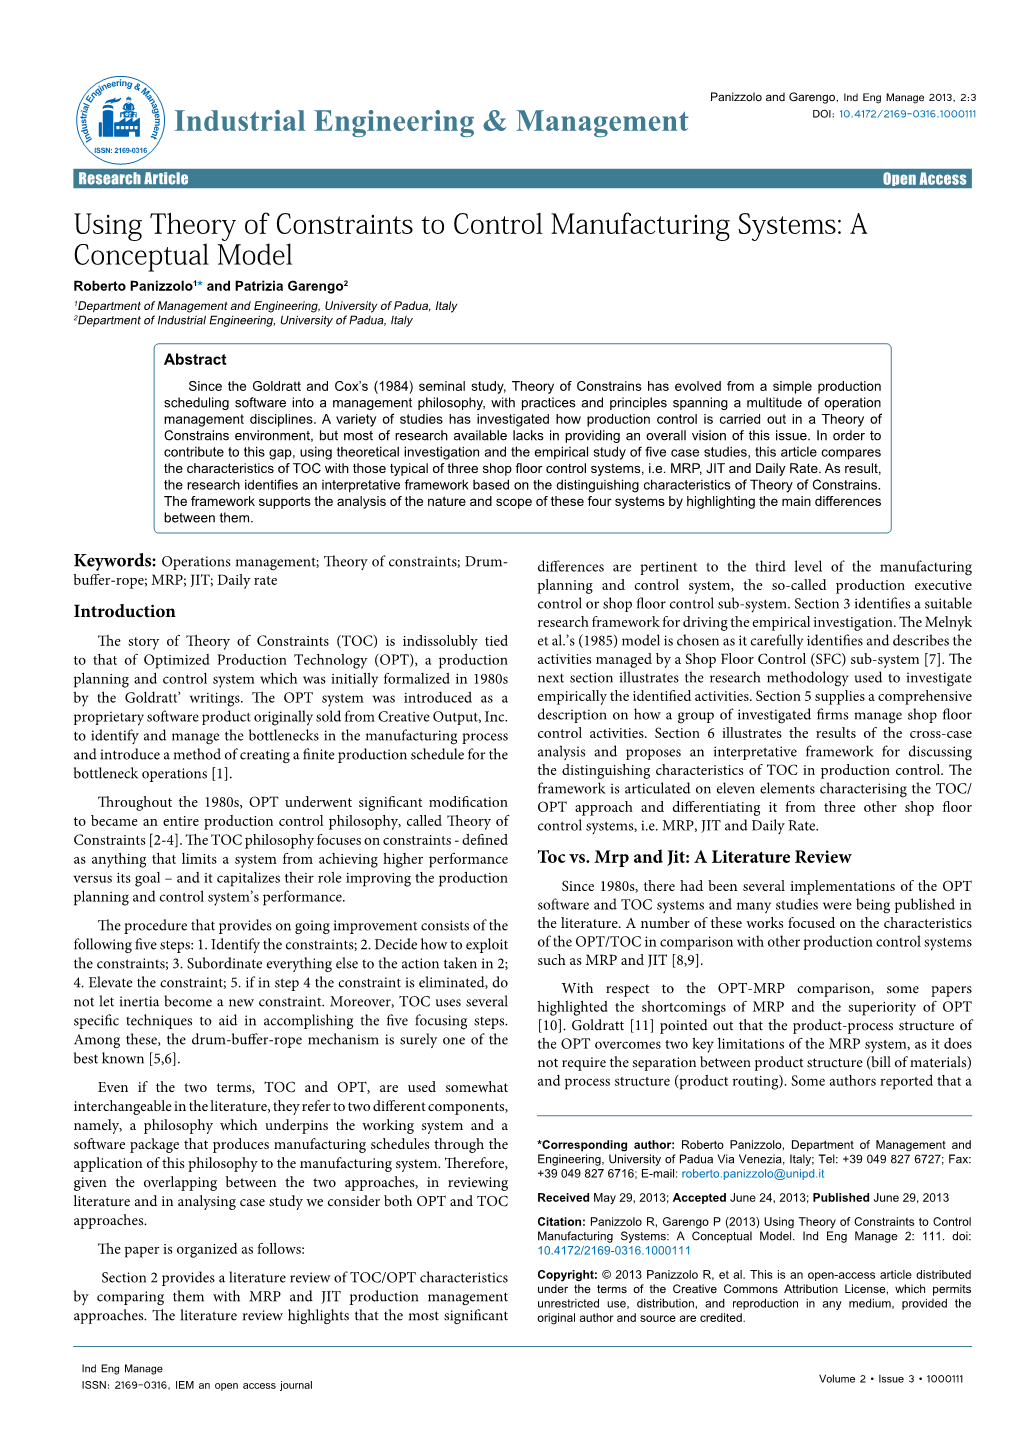 Using Theory of Constraints to Control Manufacturing Systems